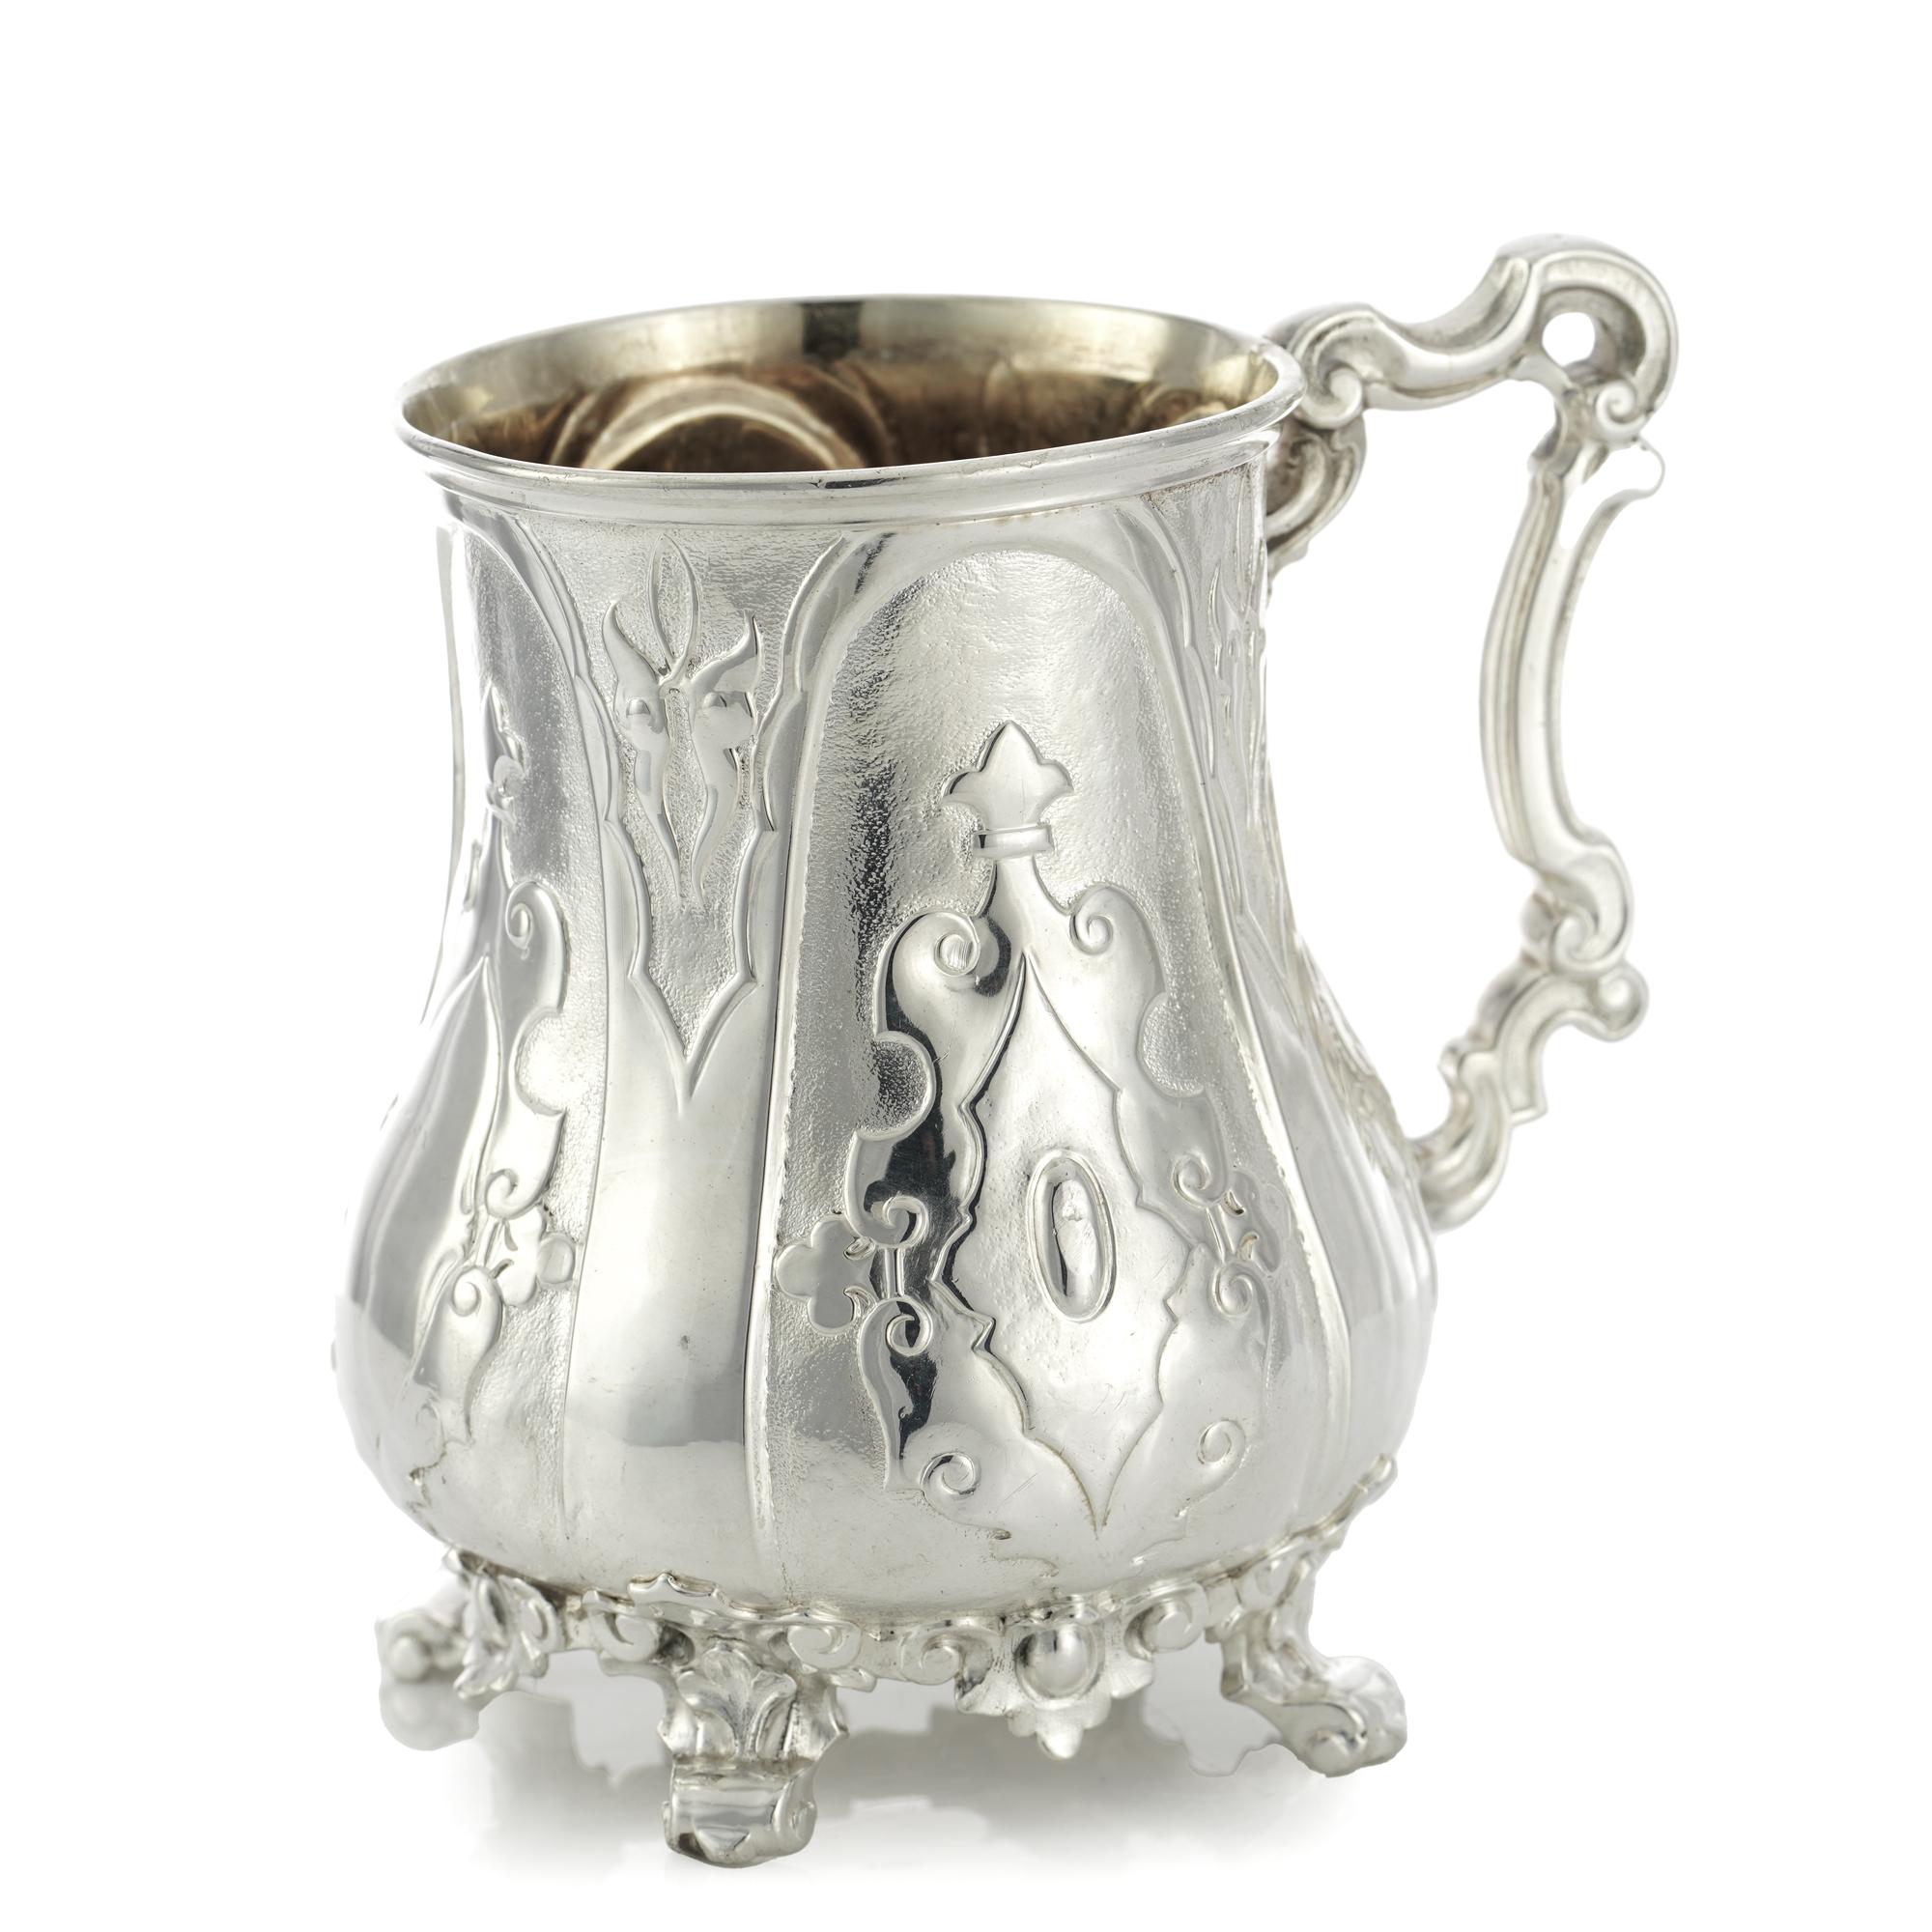 Antique Victorian sterling silver decorative mug with handle.
Made in England, London, 1847
Maker: George Ivory
Fully hallmarked.

 Approx. Dimensions - 
 Length x width x height: 10 x 8 x 10.8 cm 
 Weight: 177 grams in total. 

 Condition: